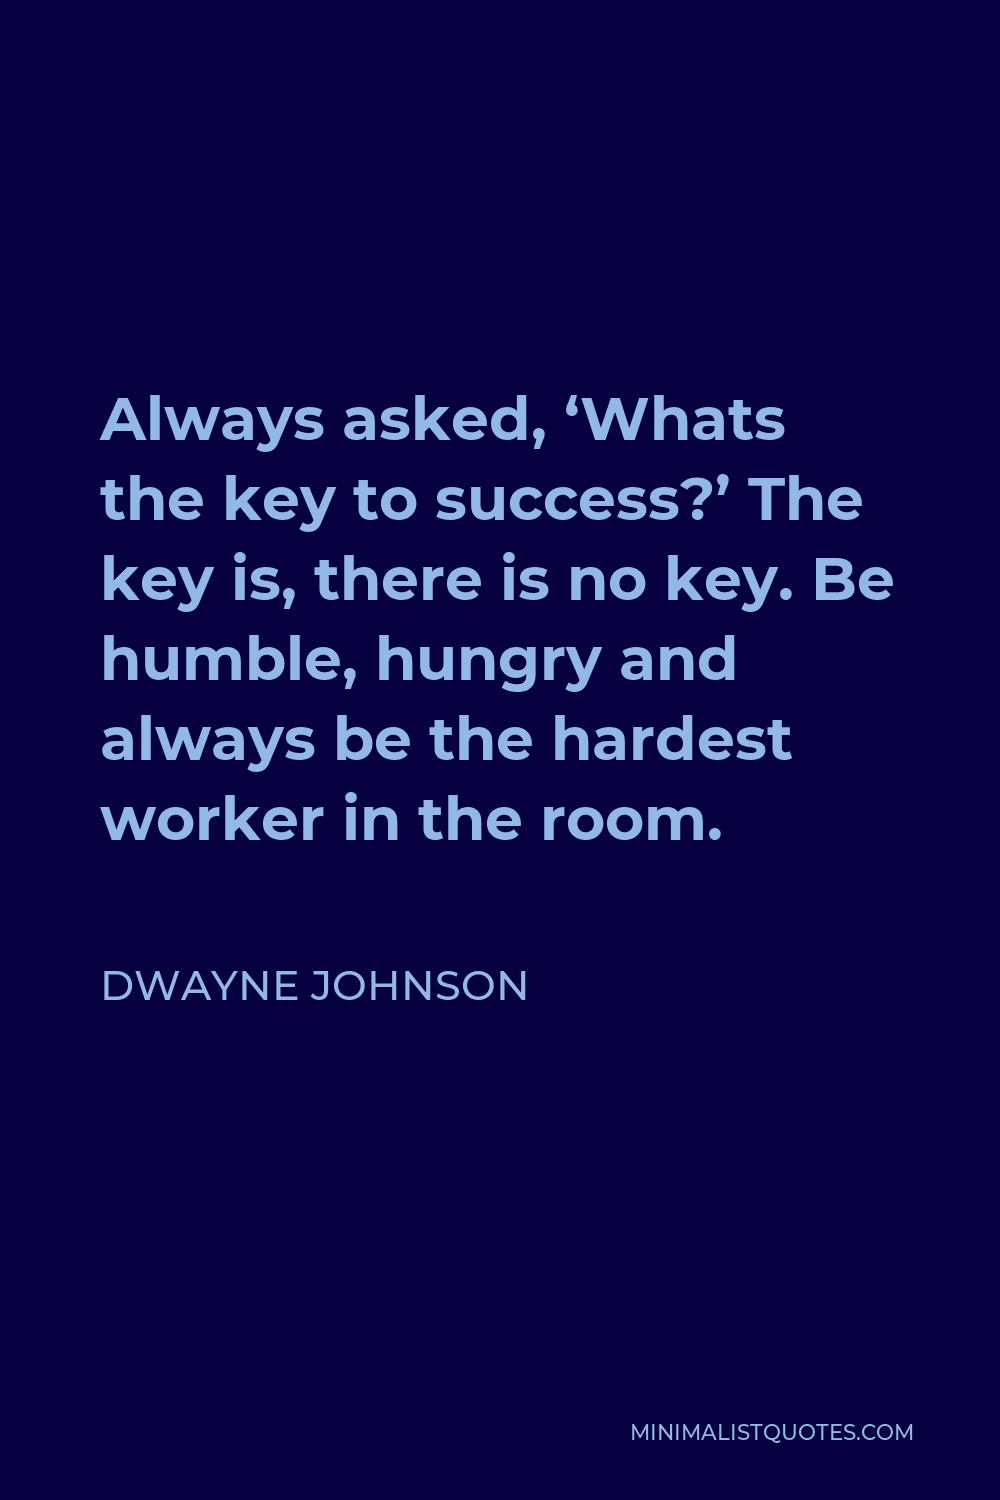 Dwayne Johnson Quote - Always asked, ‘Whats the key to success?’ The key is, there is no key. Be humble, hungry and always be the hardest worker in the room.